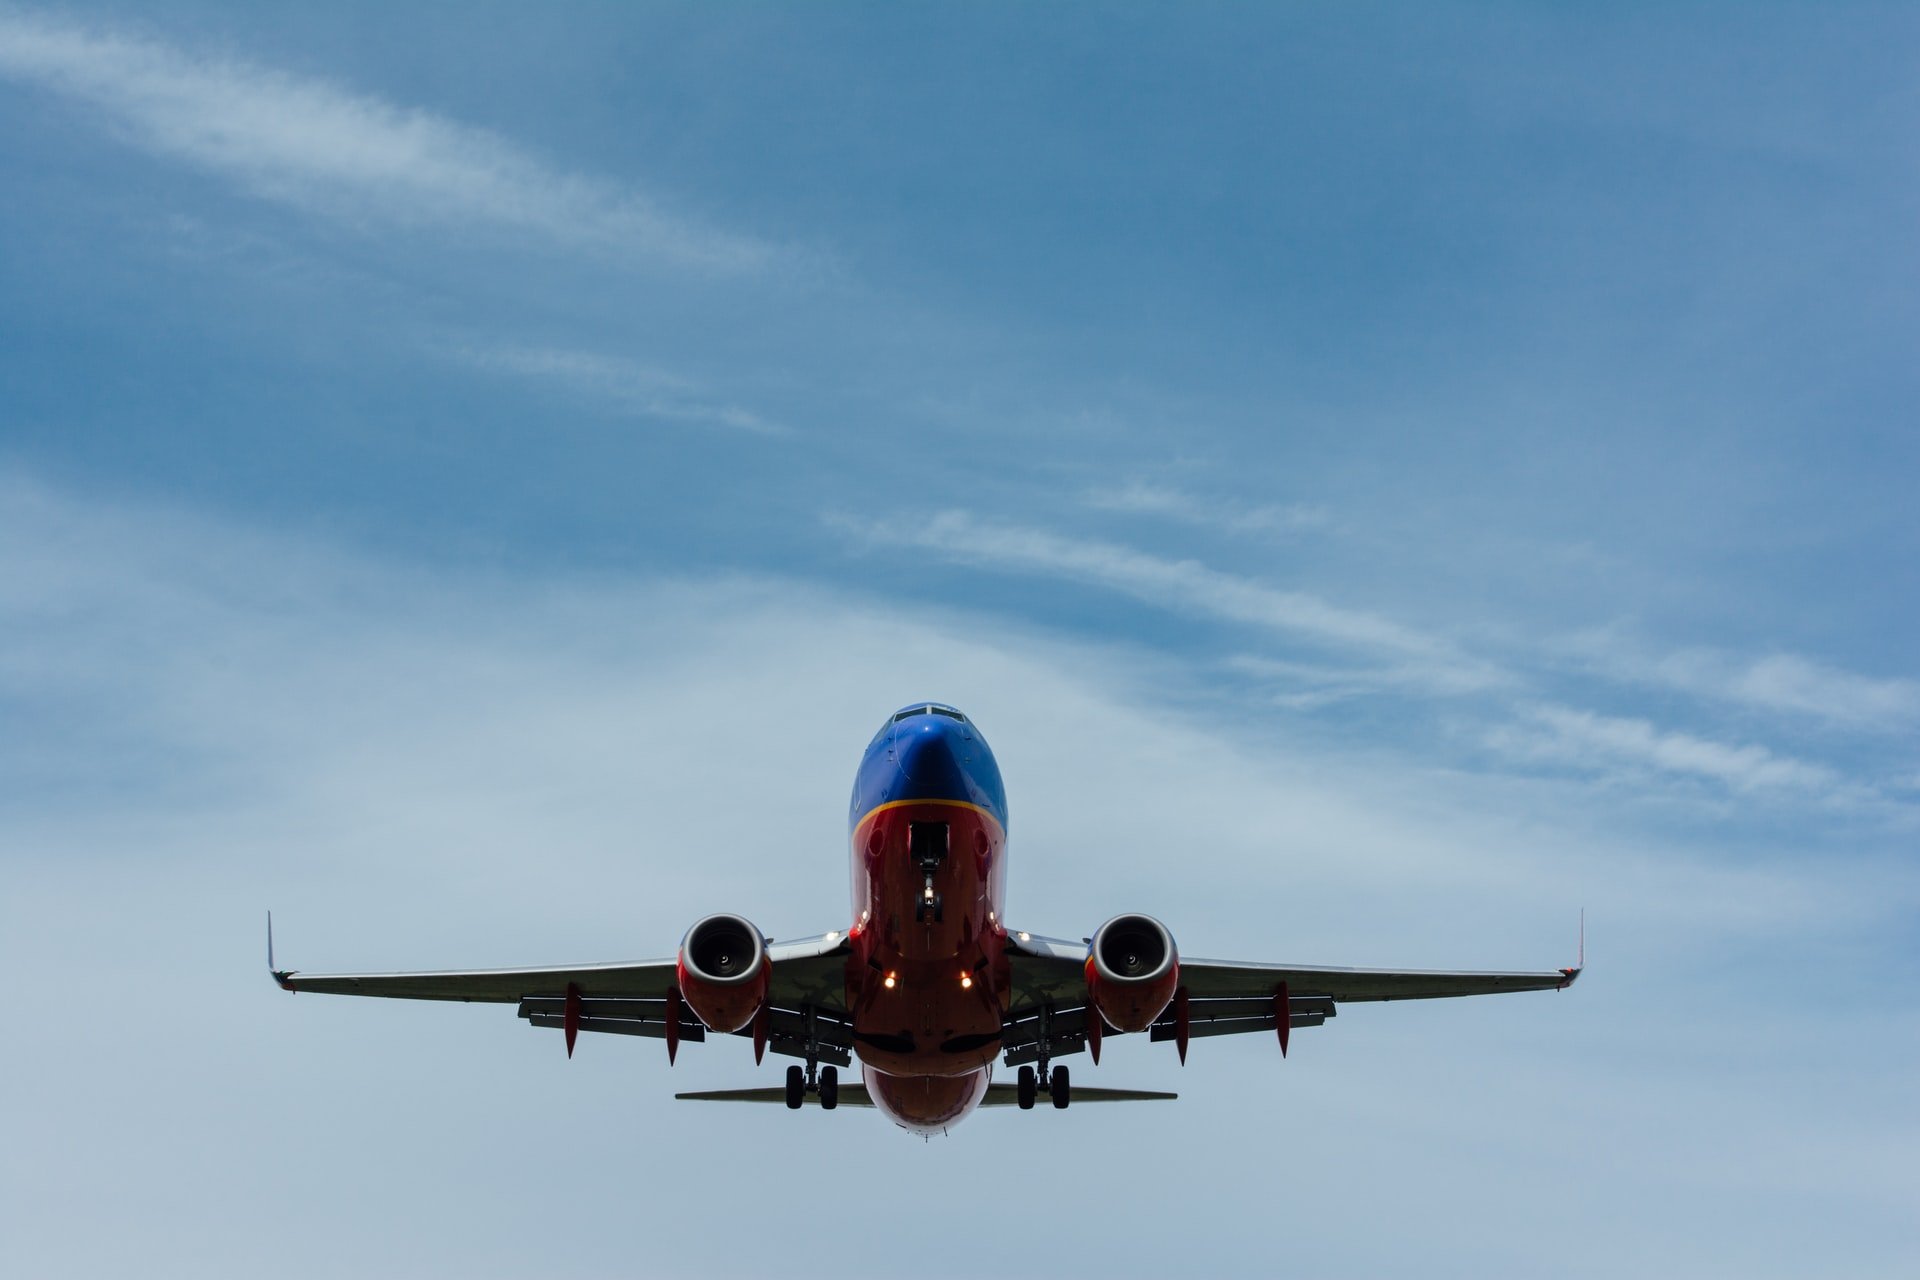 Her son asked her if the airplane was going to crash | Source: Unsplash